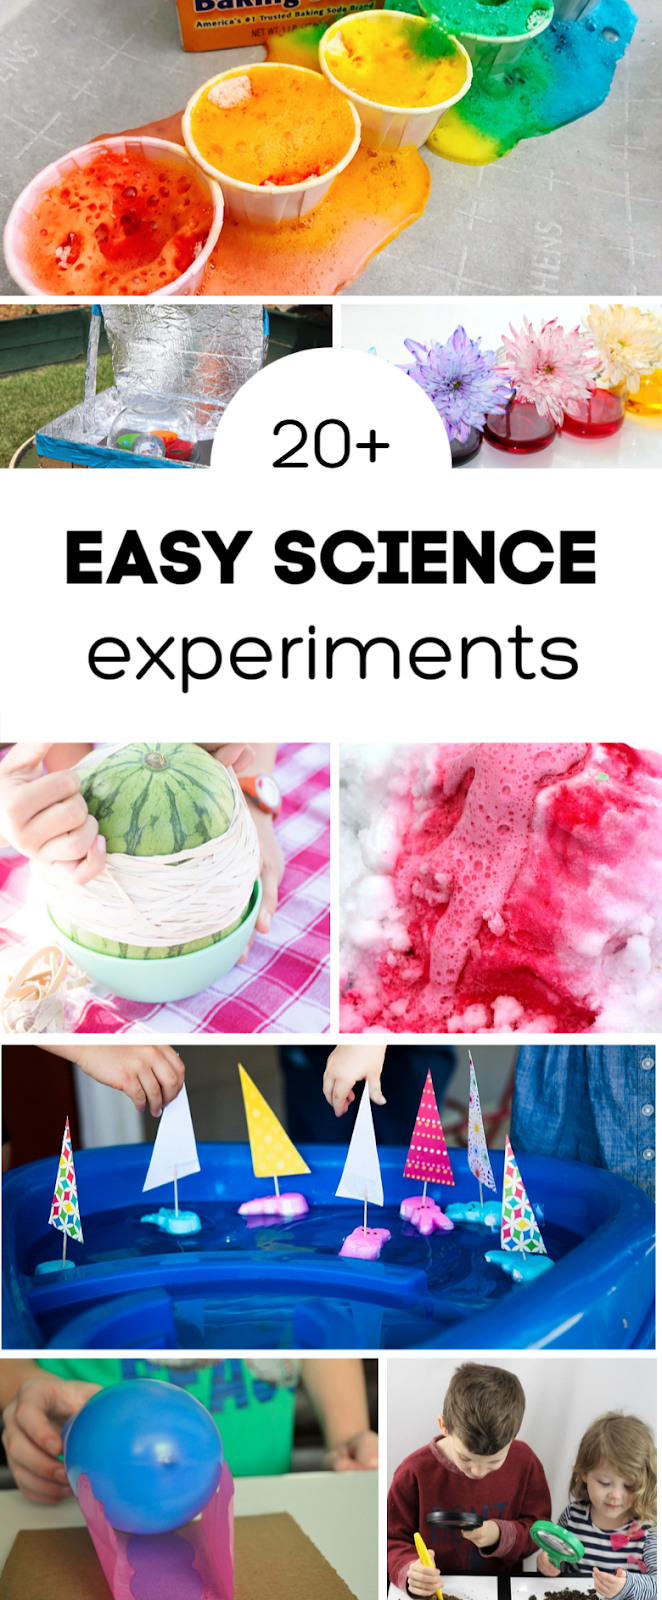 Easy science experiments for kids